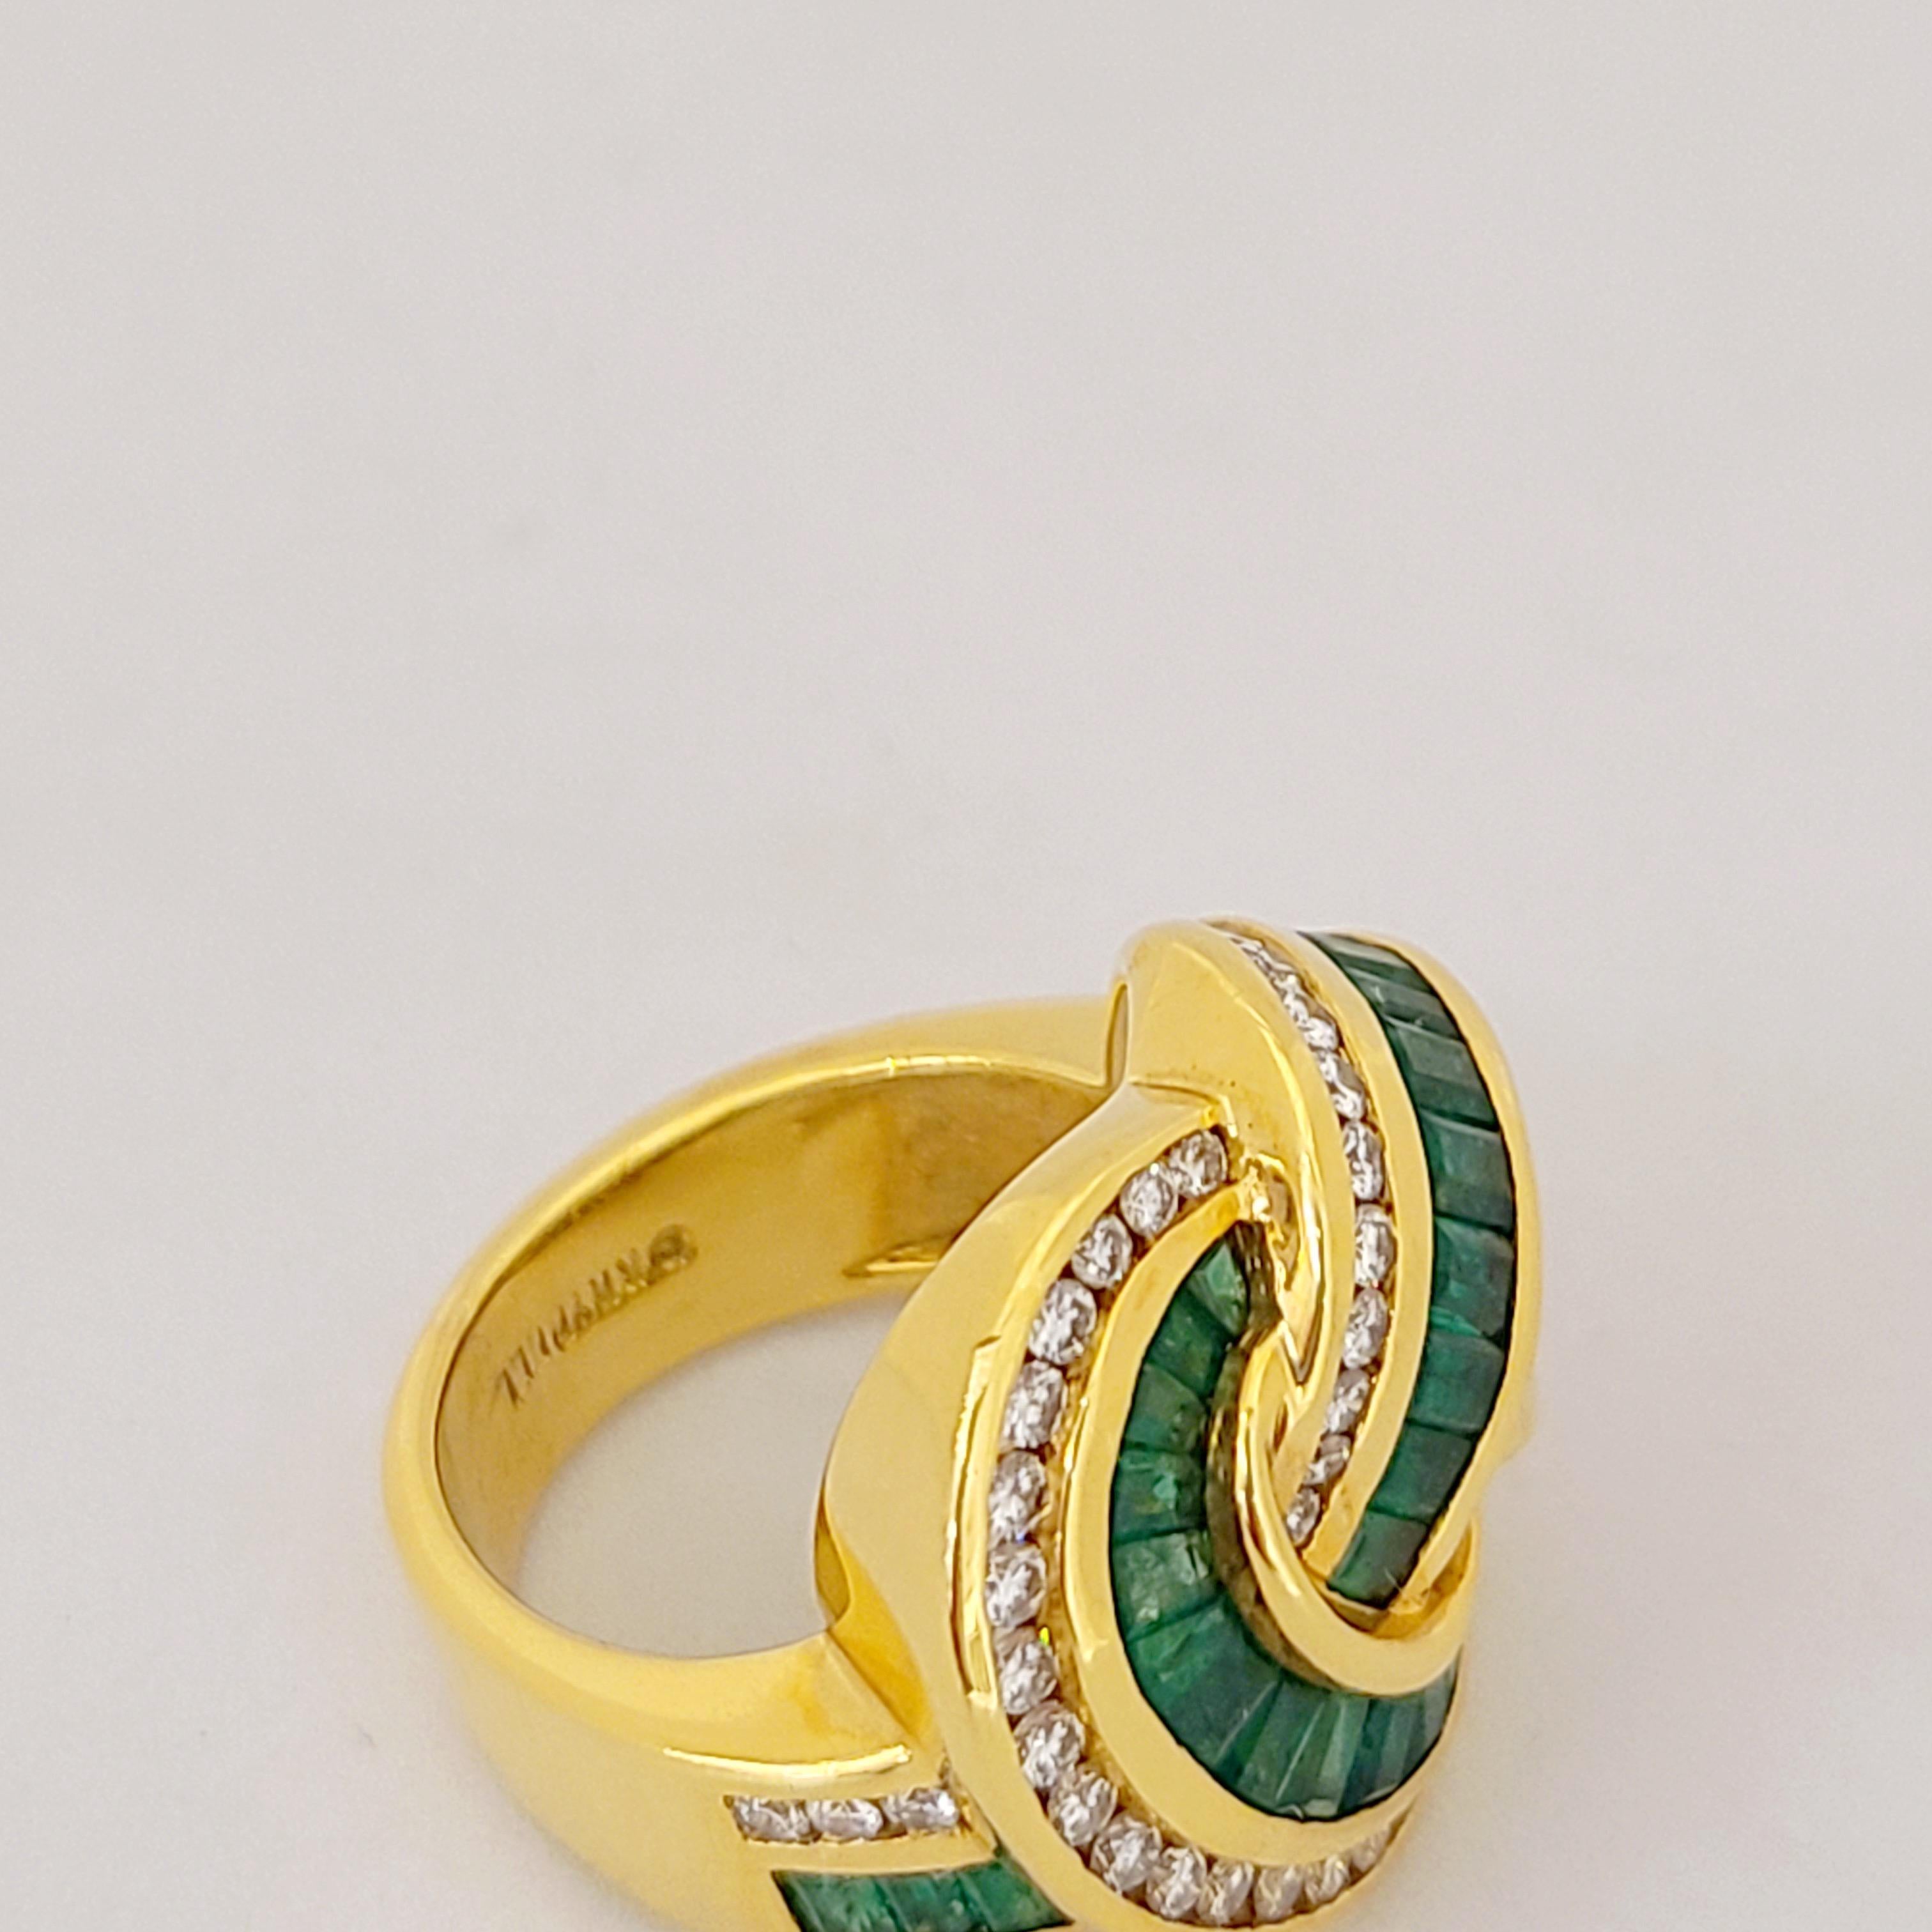 Baguette Cut Charles Krypell 18 Karat Yellow Gold, 2.59 Carat Emeralds and Diamond Knot Ring For Sale